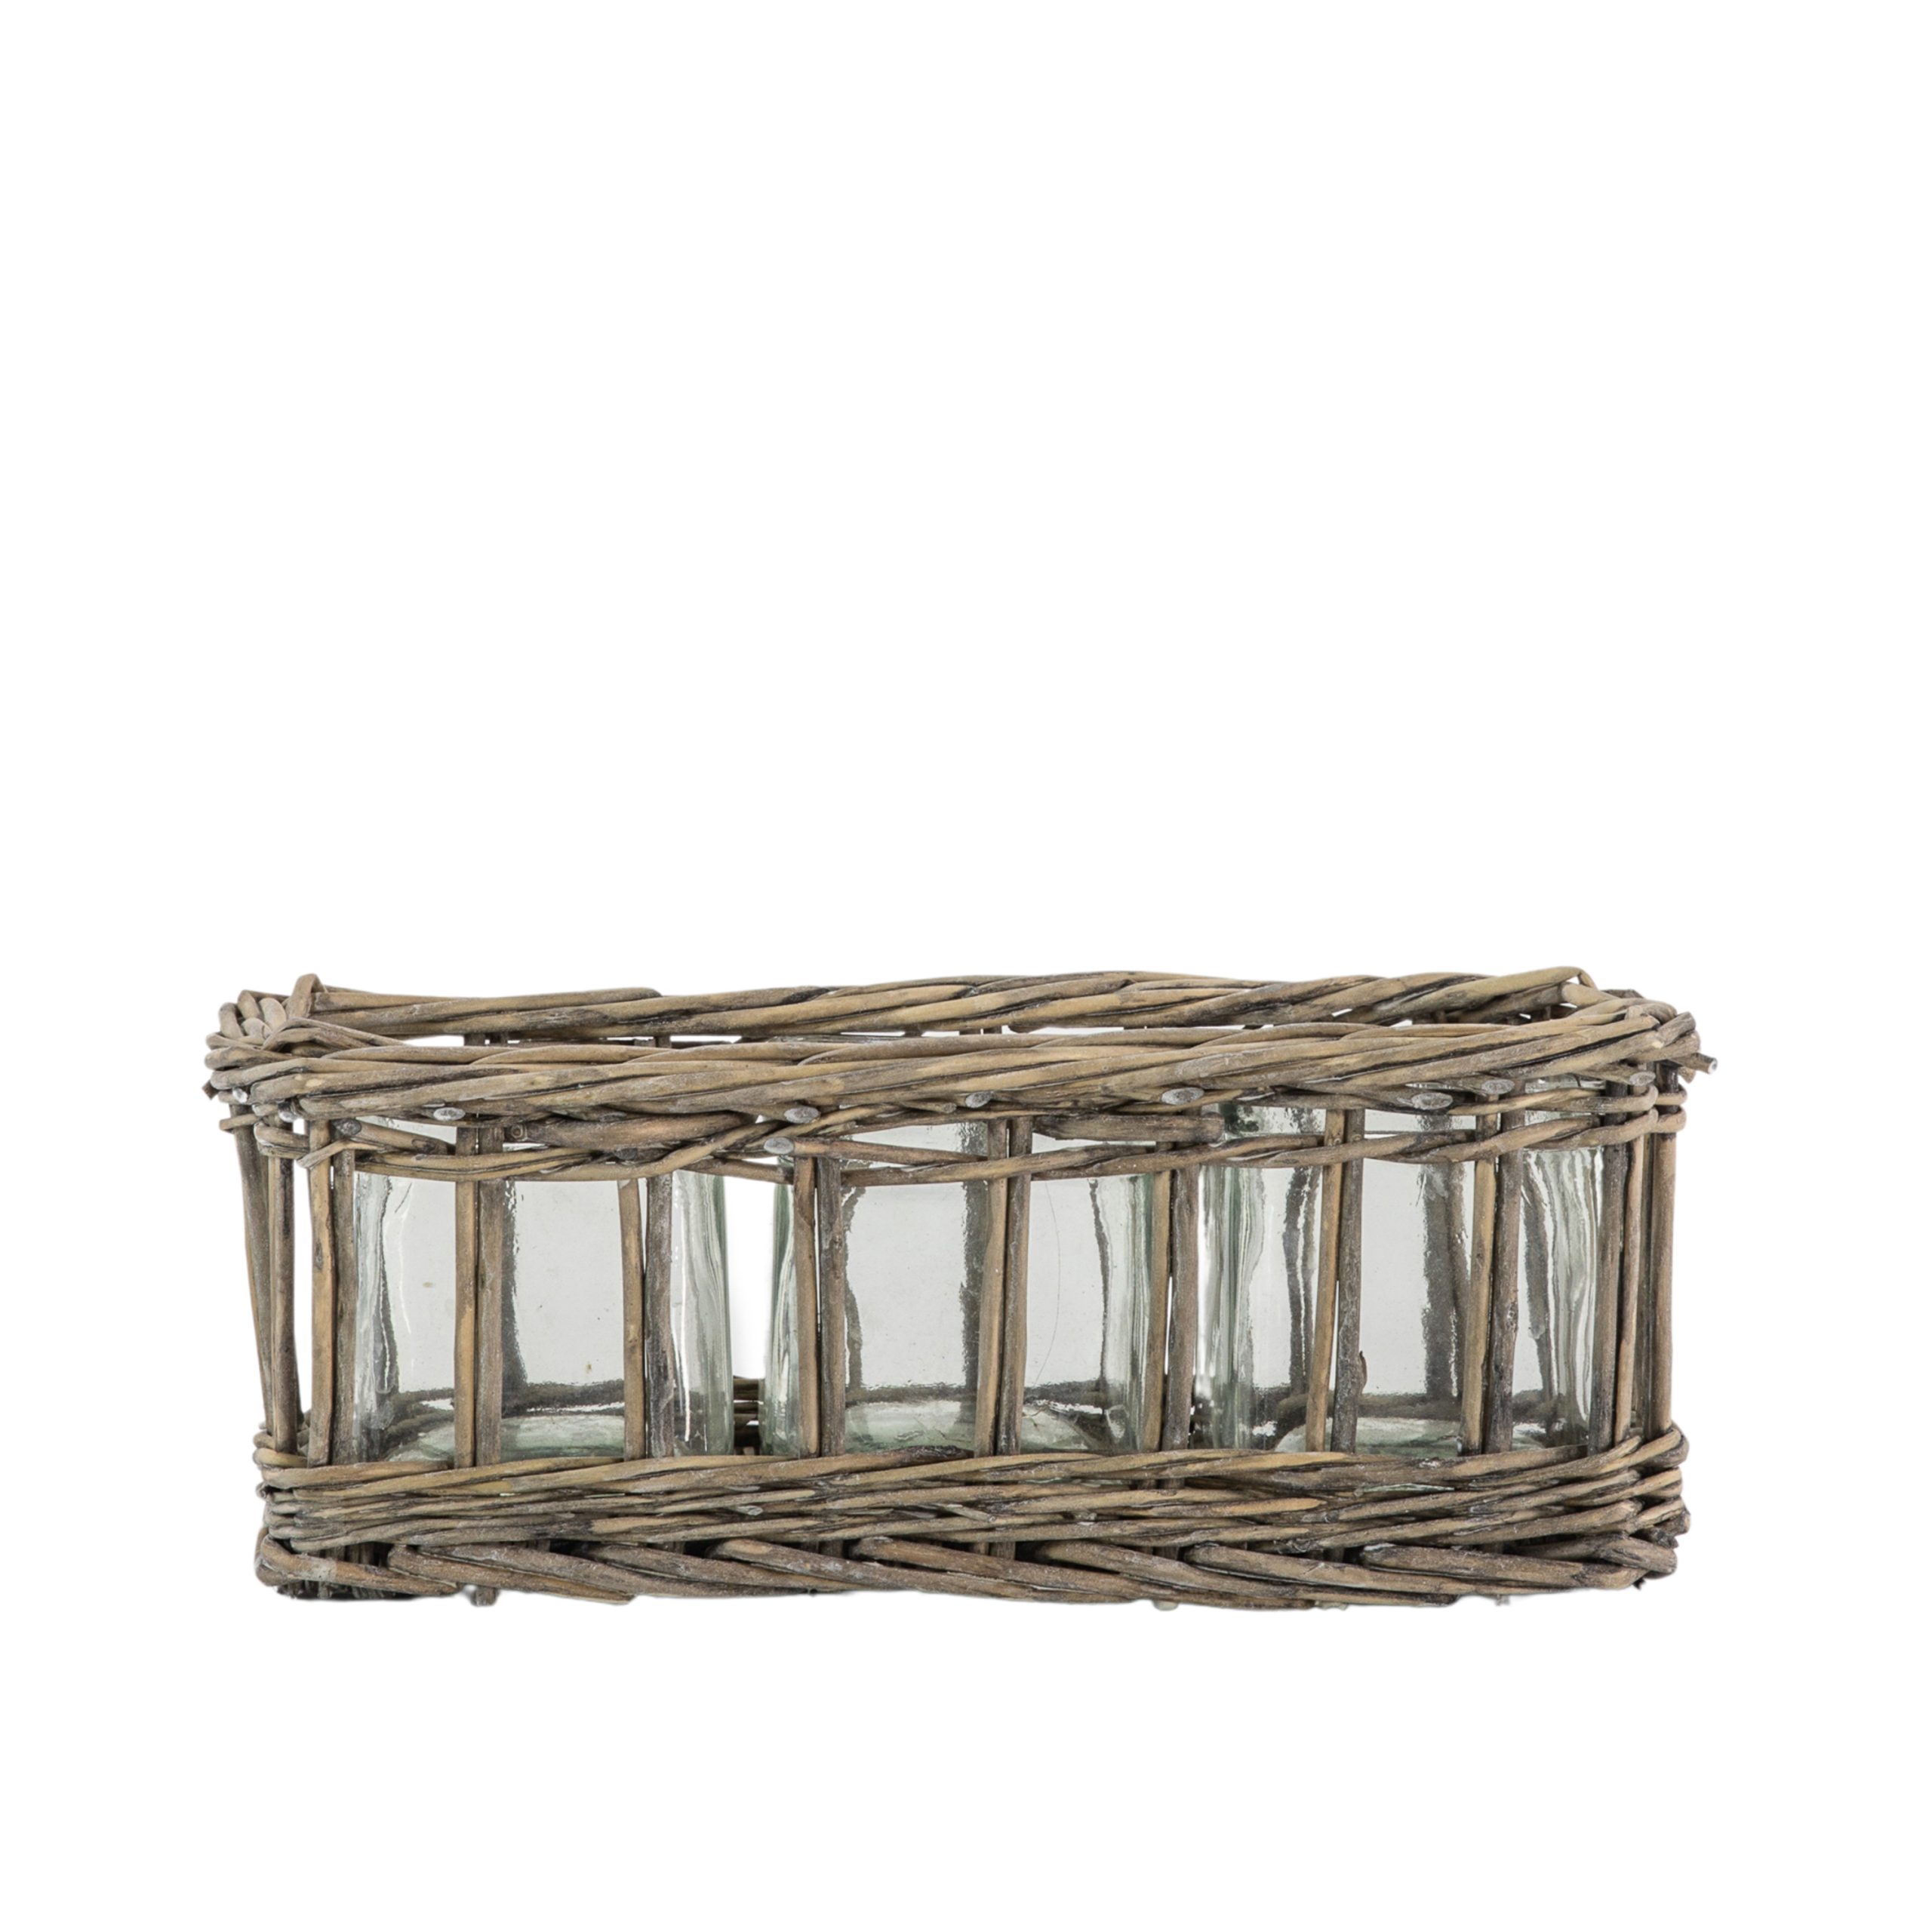 Gallery Direct Hambleden Candle Holder  Willow